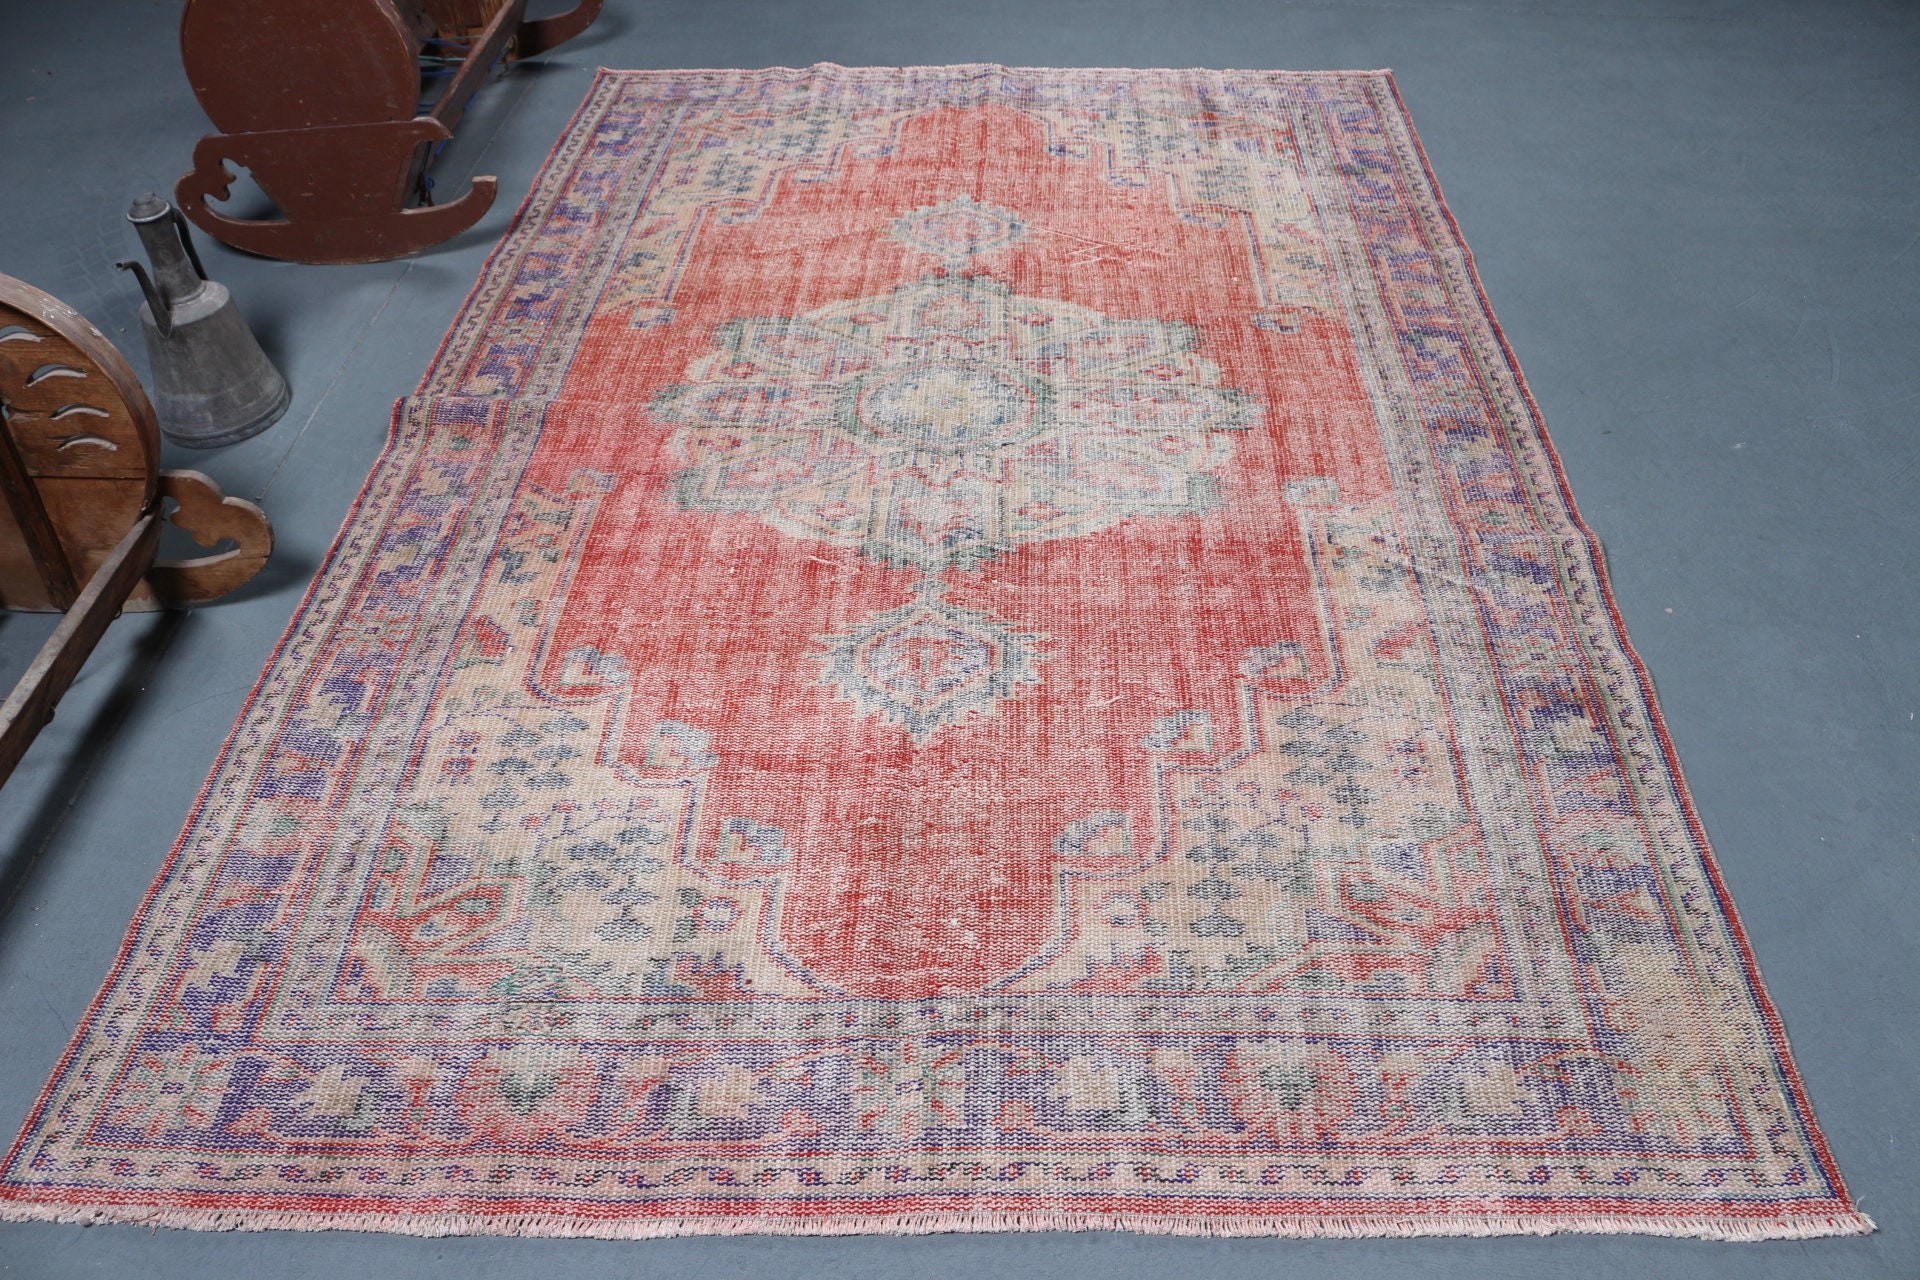 Dining Room Rugs, Red Home Decor Rugs, Bedroom Rug, Aztec Rugs, Vintage Rug, Turkish Rugs, Oushak Rug, 5.6x8.6 ft Large Rug, Rugs for Salon